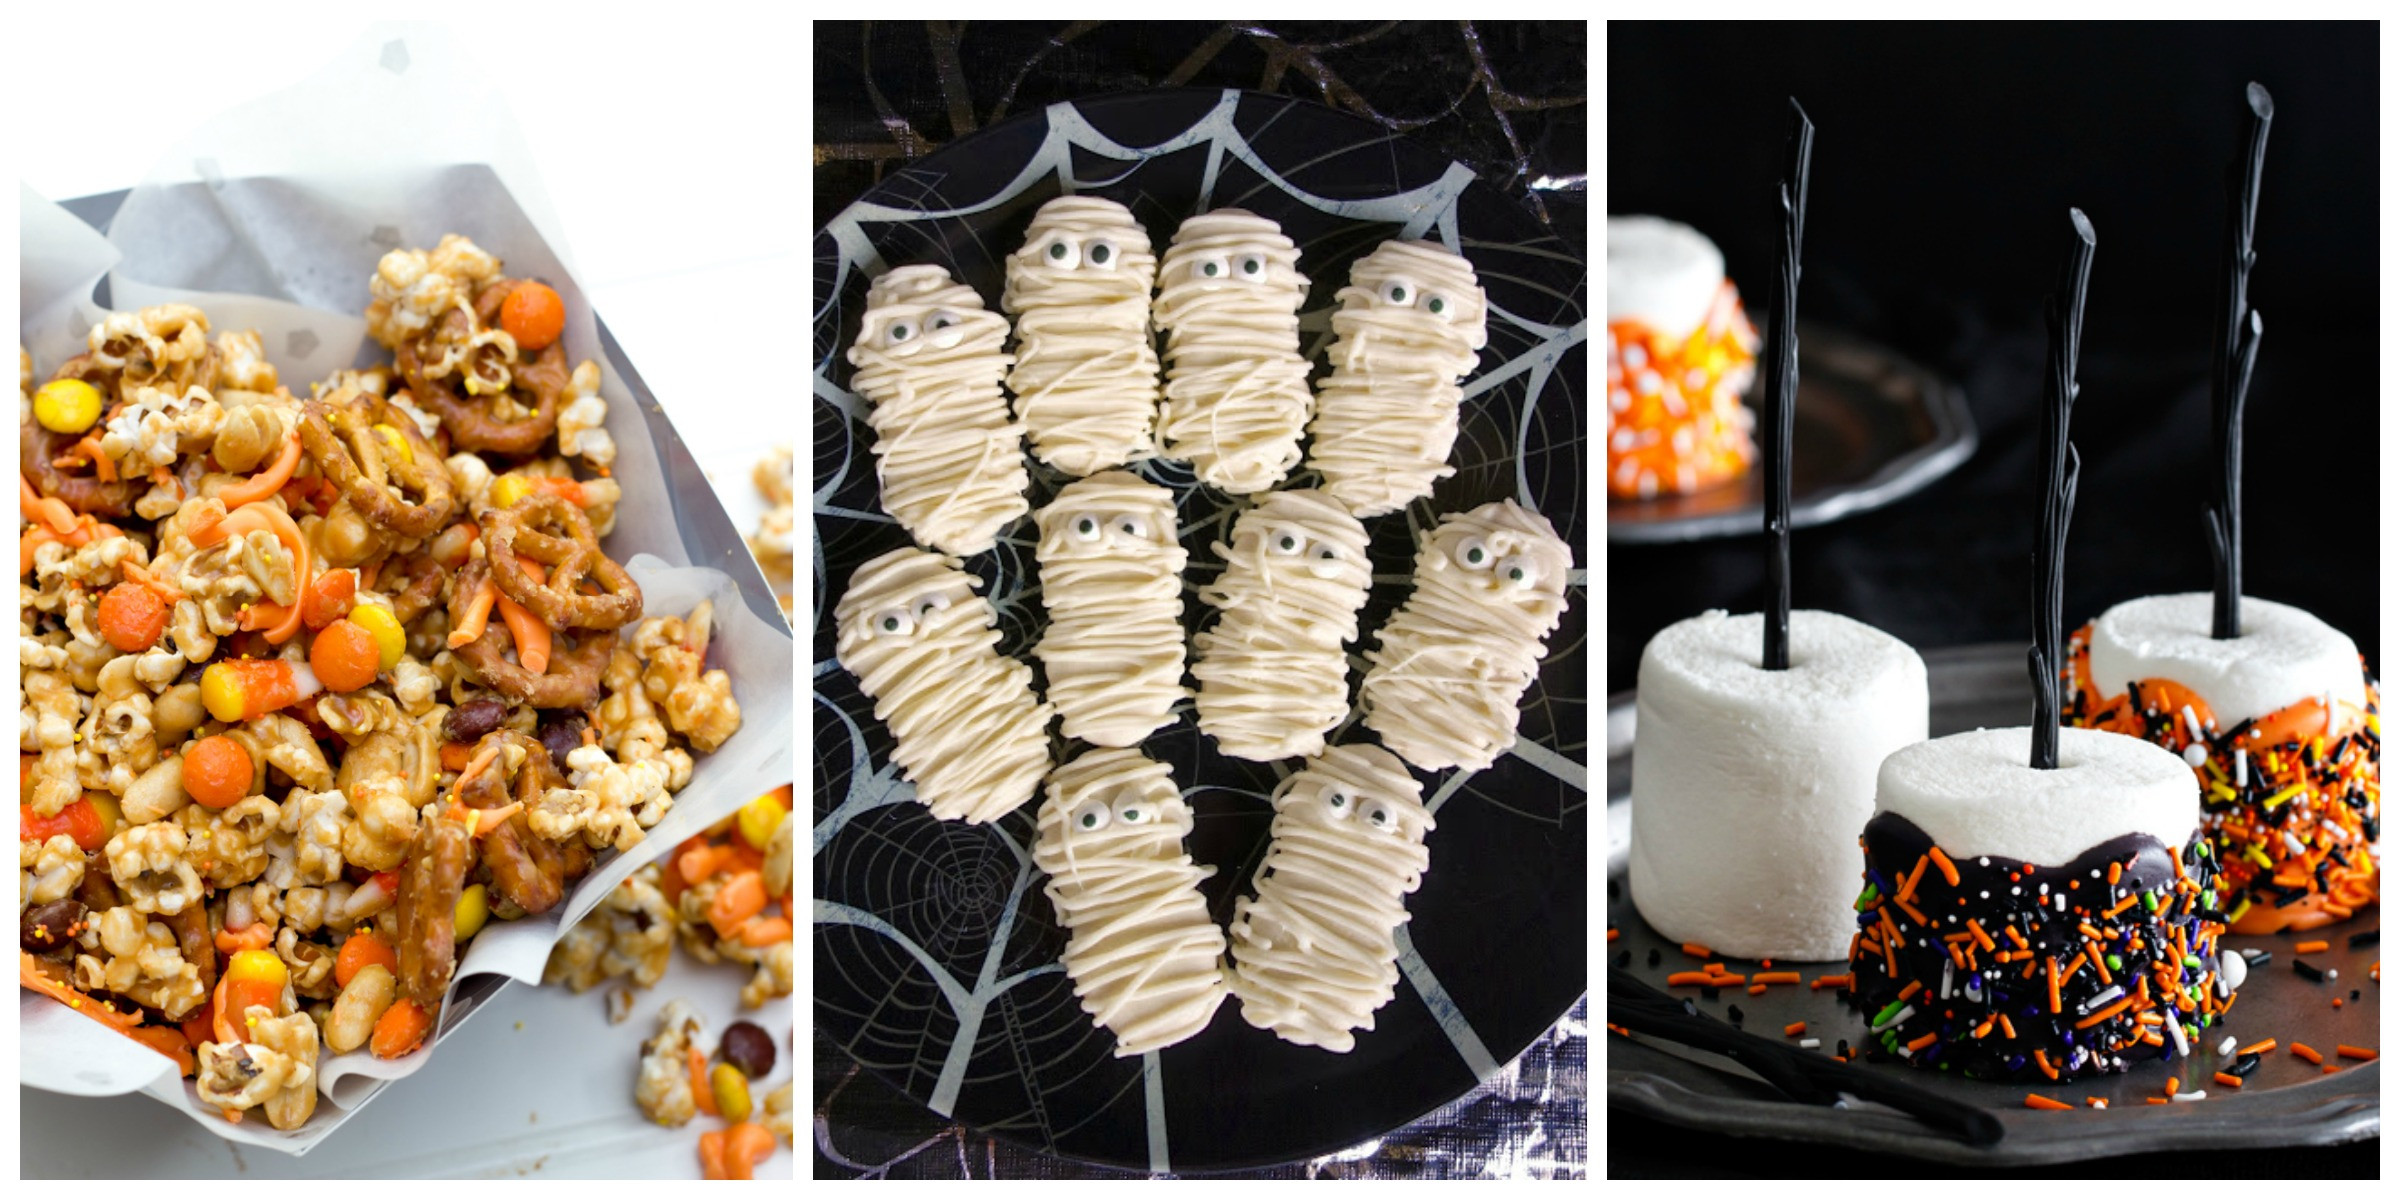 Halloween Party Recipes Ideas
 22 Easy Halloween Party Food Ideas Cute Recipes for